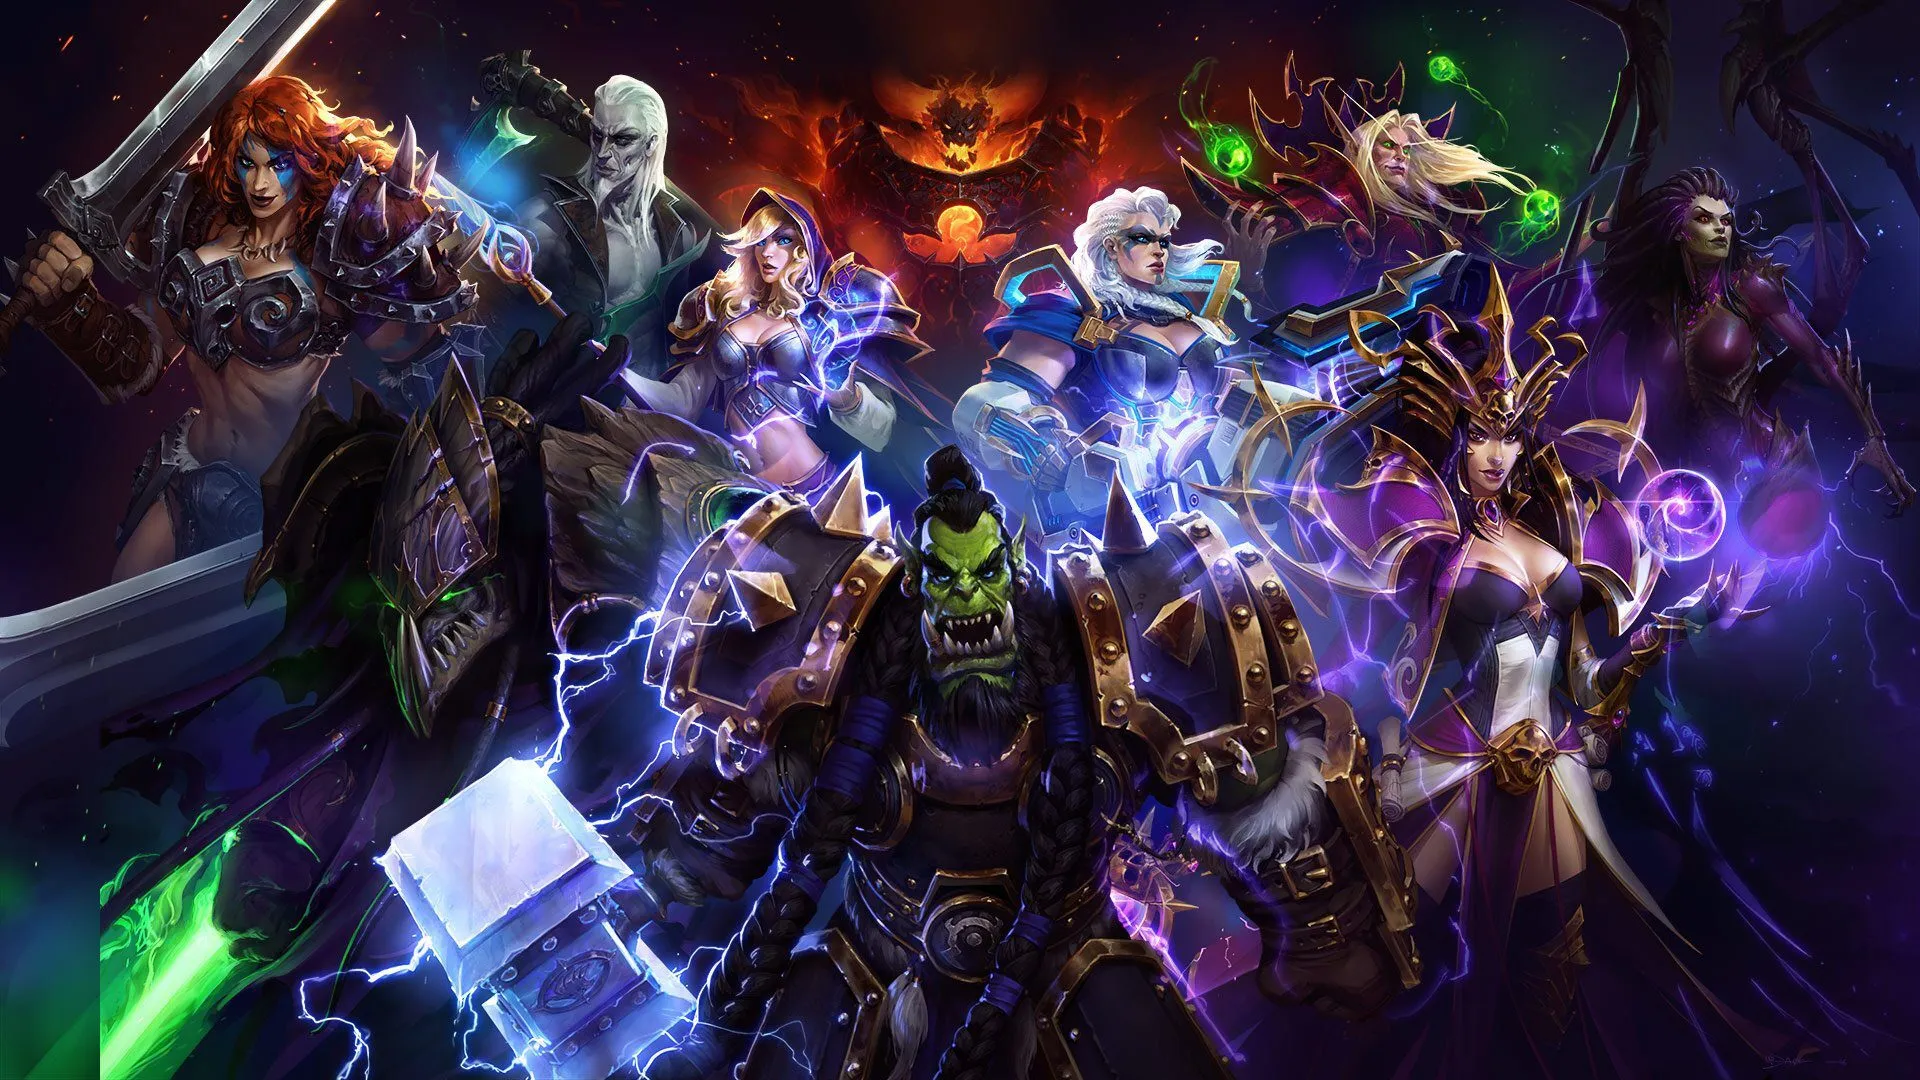 Heroes of the Storm and its undying competitive scene - HoTS in 2022